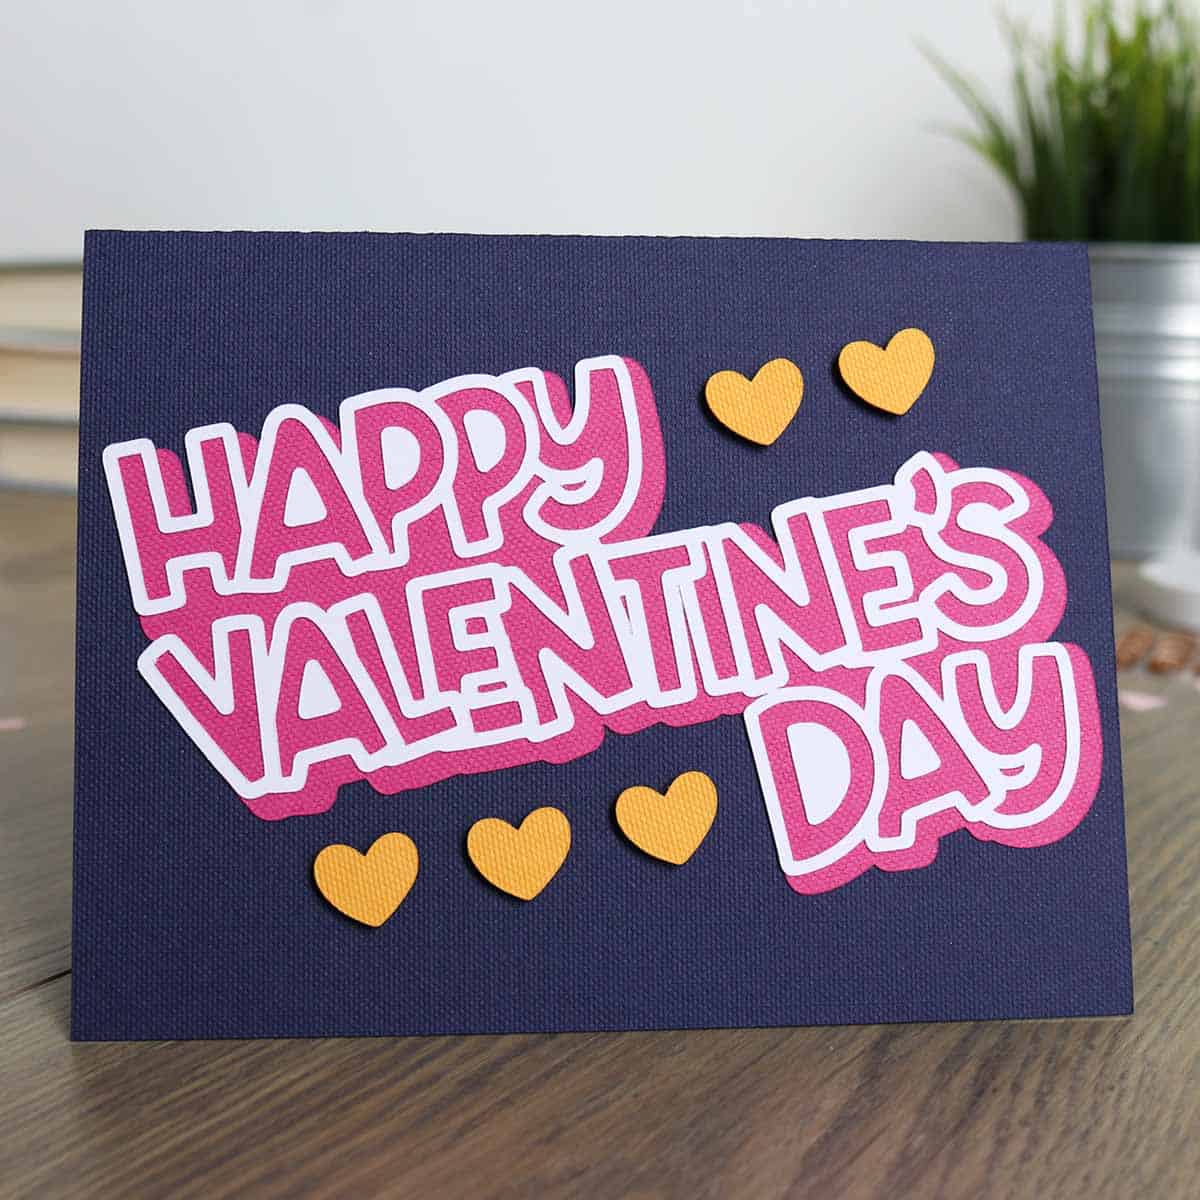 cricut valentines day card ideas: bright happy valentine's card with smart paper sticker cardstock